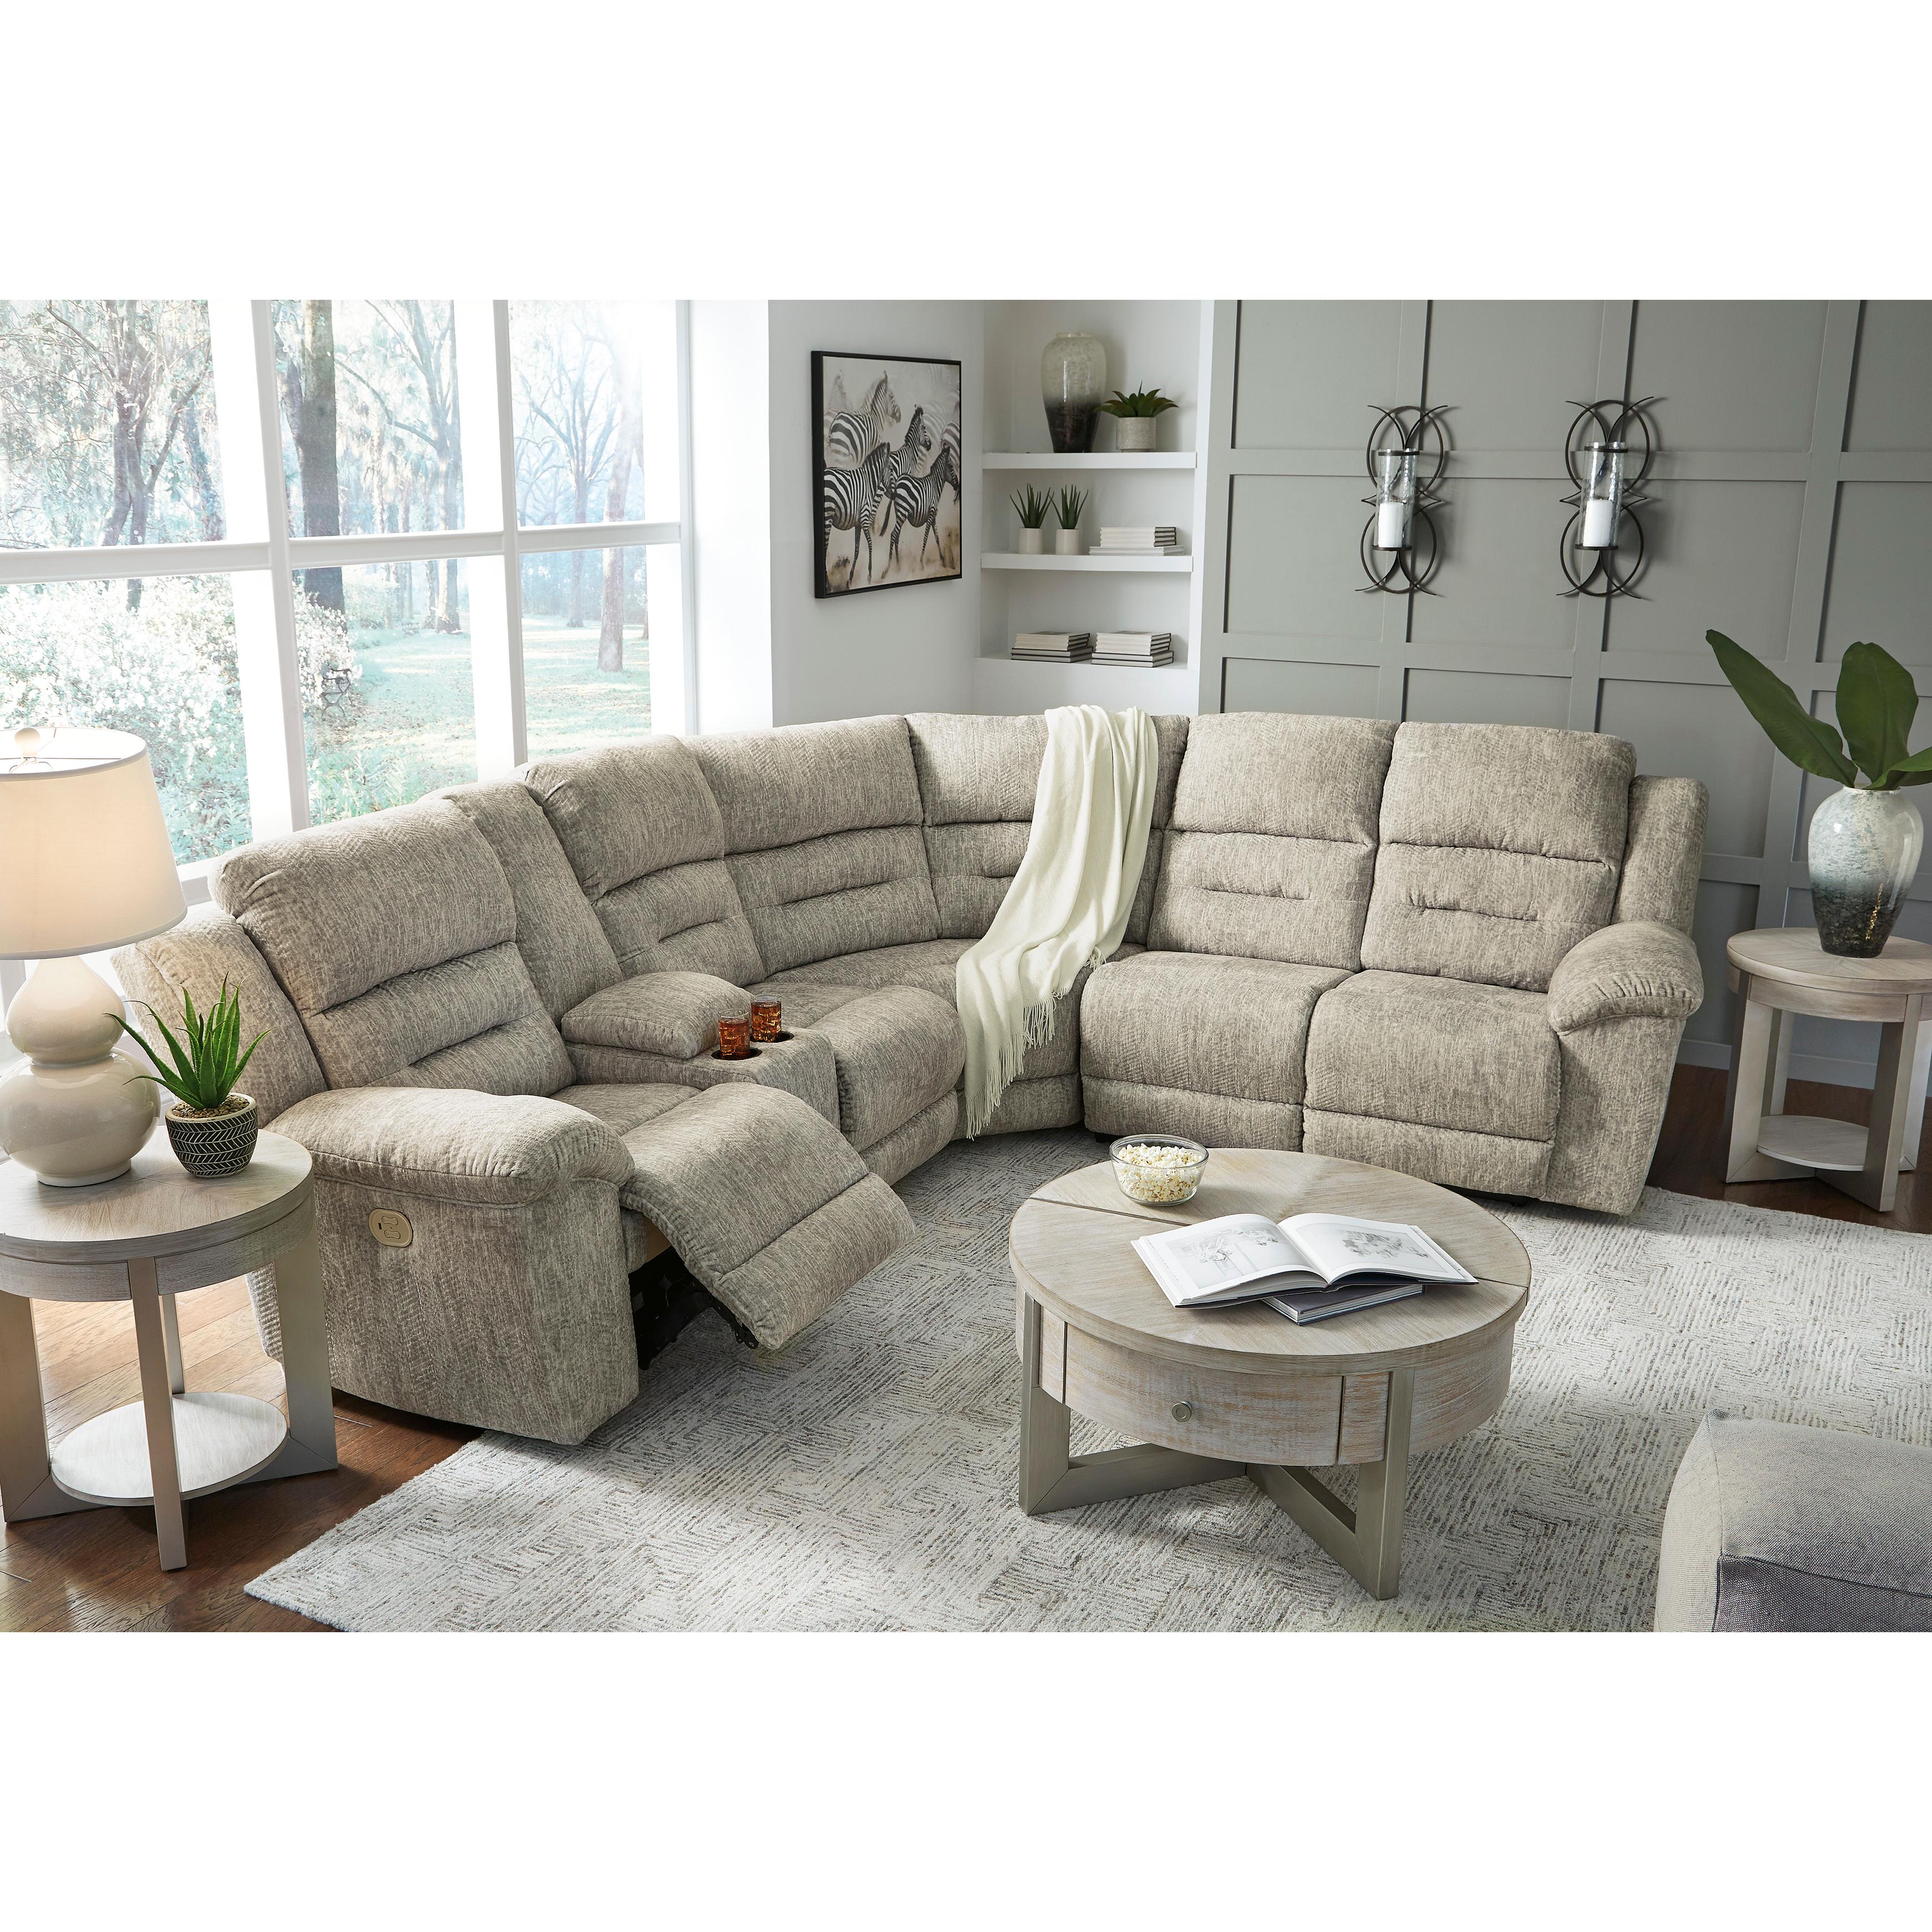 Signature Design by Ashley Family Den Power Reclining Fabric 3 pc Sectional 51802S1